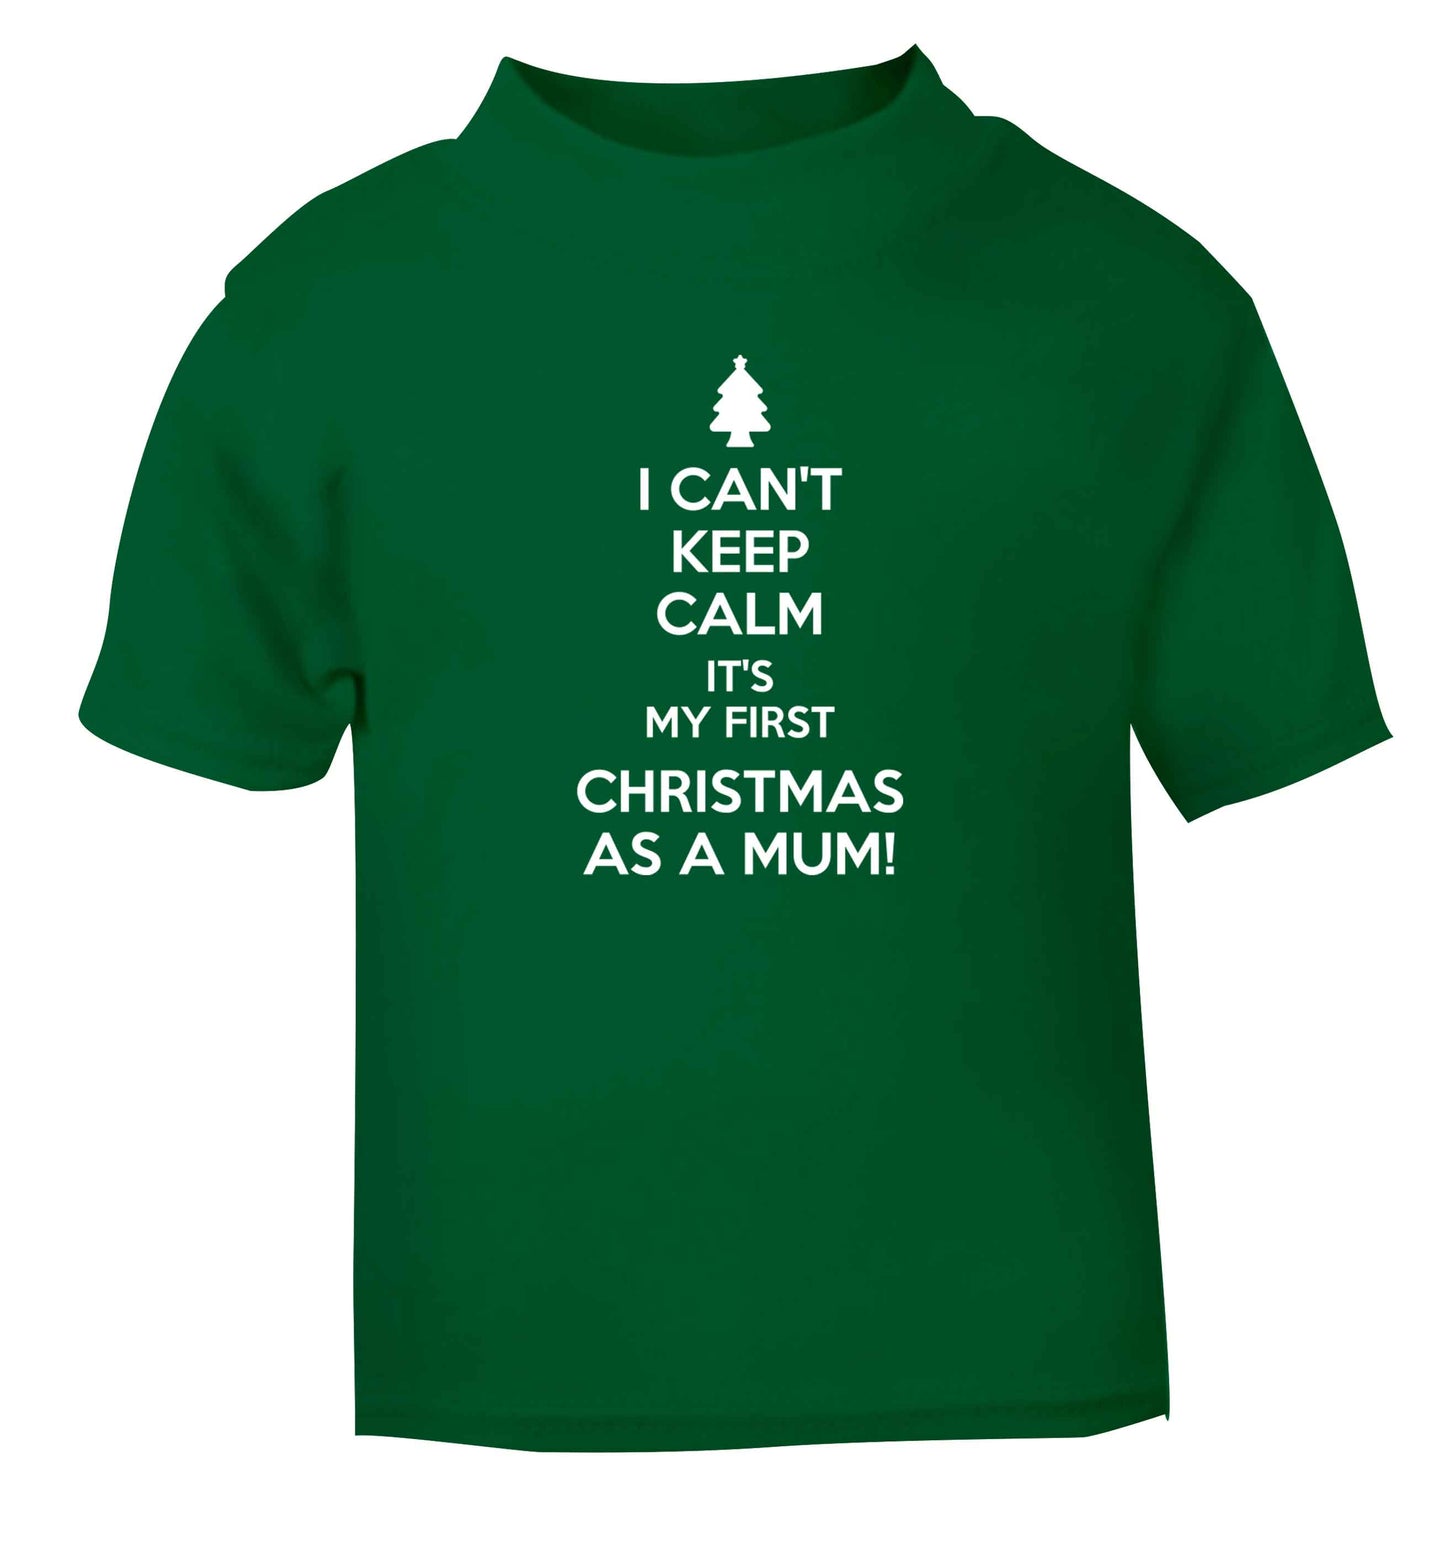 I can't keep calm it's my first Christmas as a mum green Baby Toddler Tshirt 2 Years